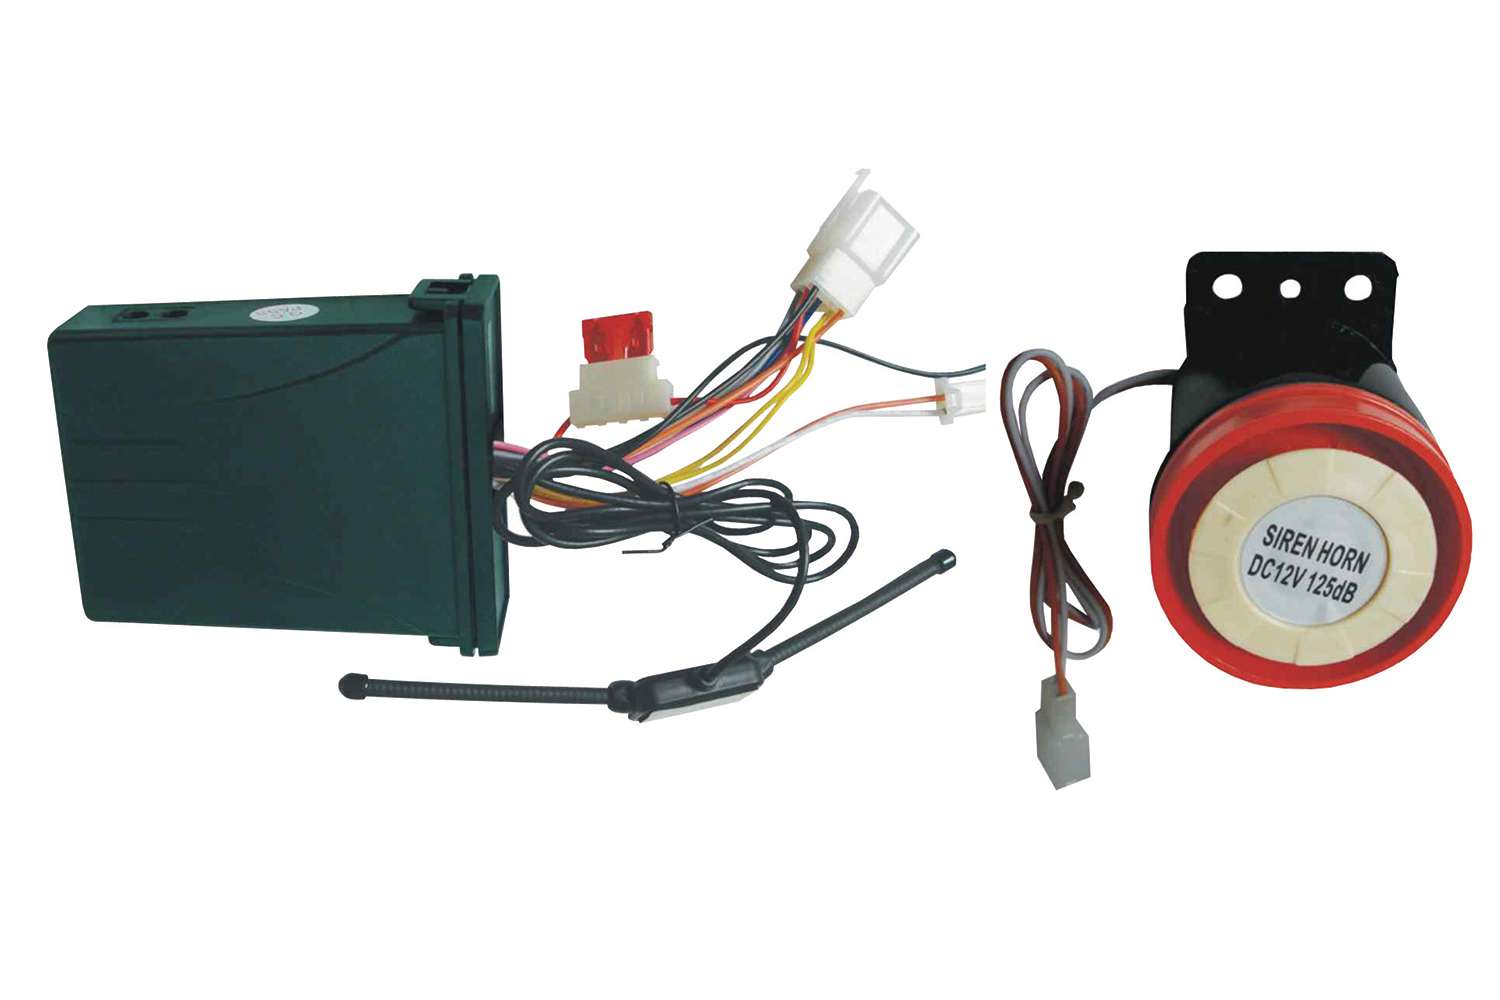 T-H Marine Two Way Boat Alarm System, $109.99